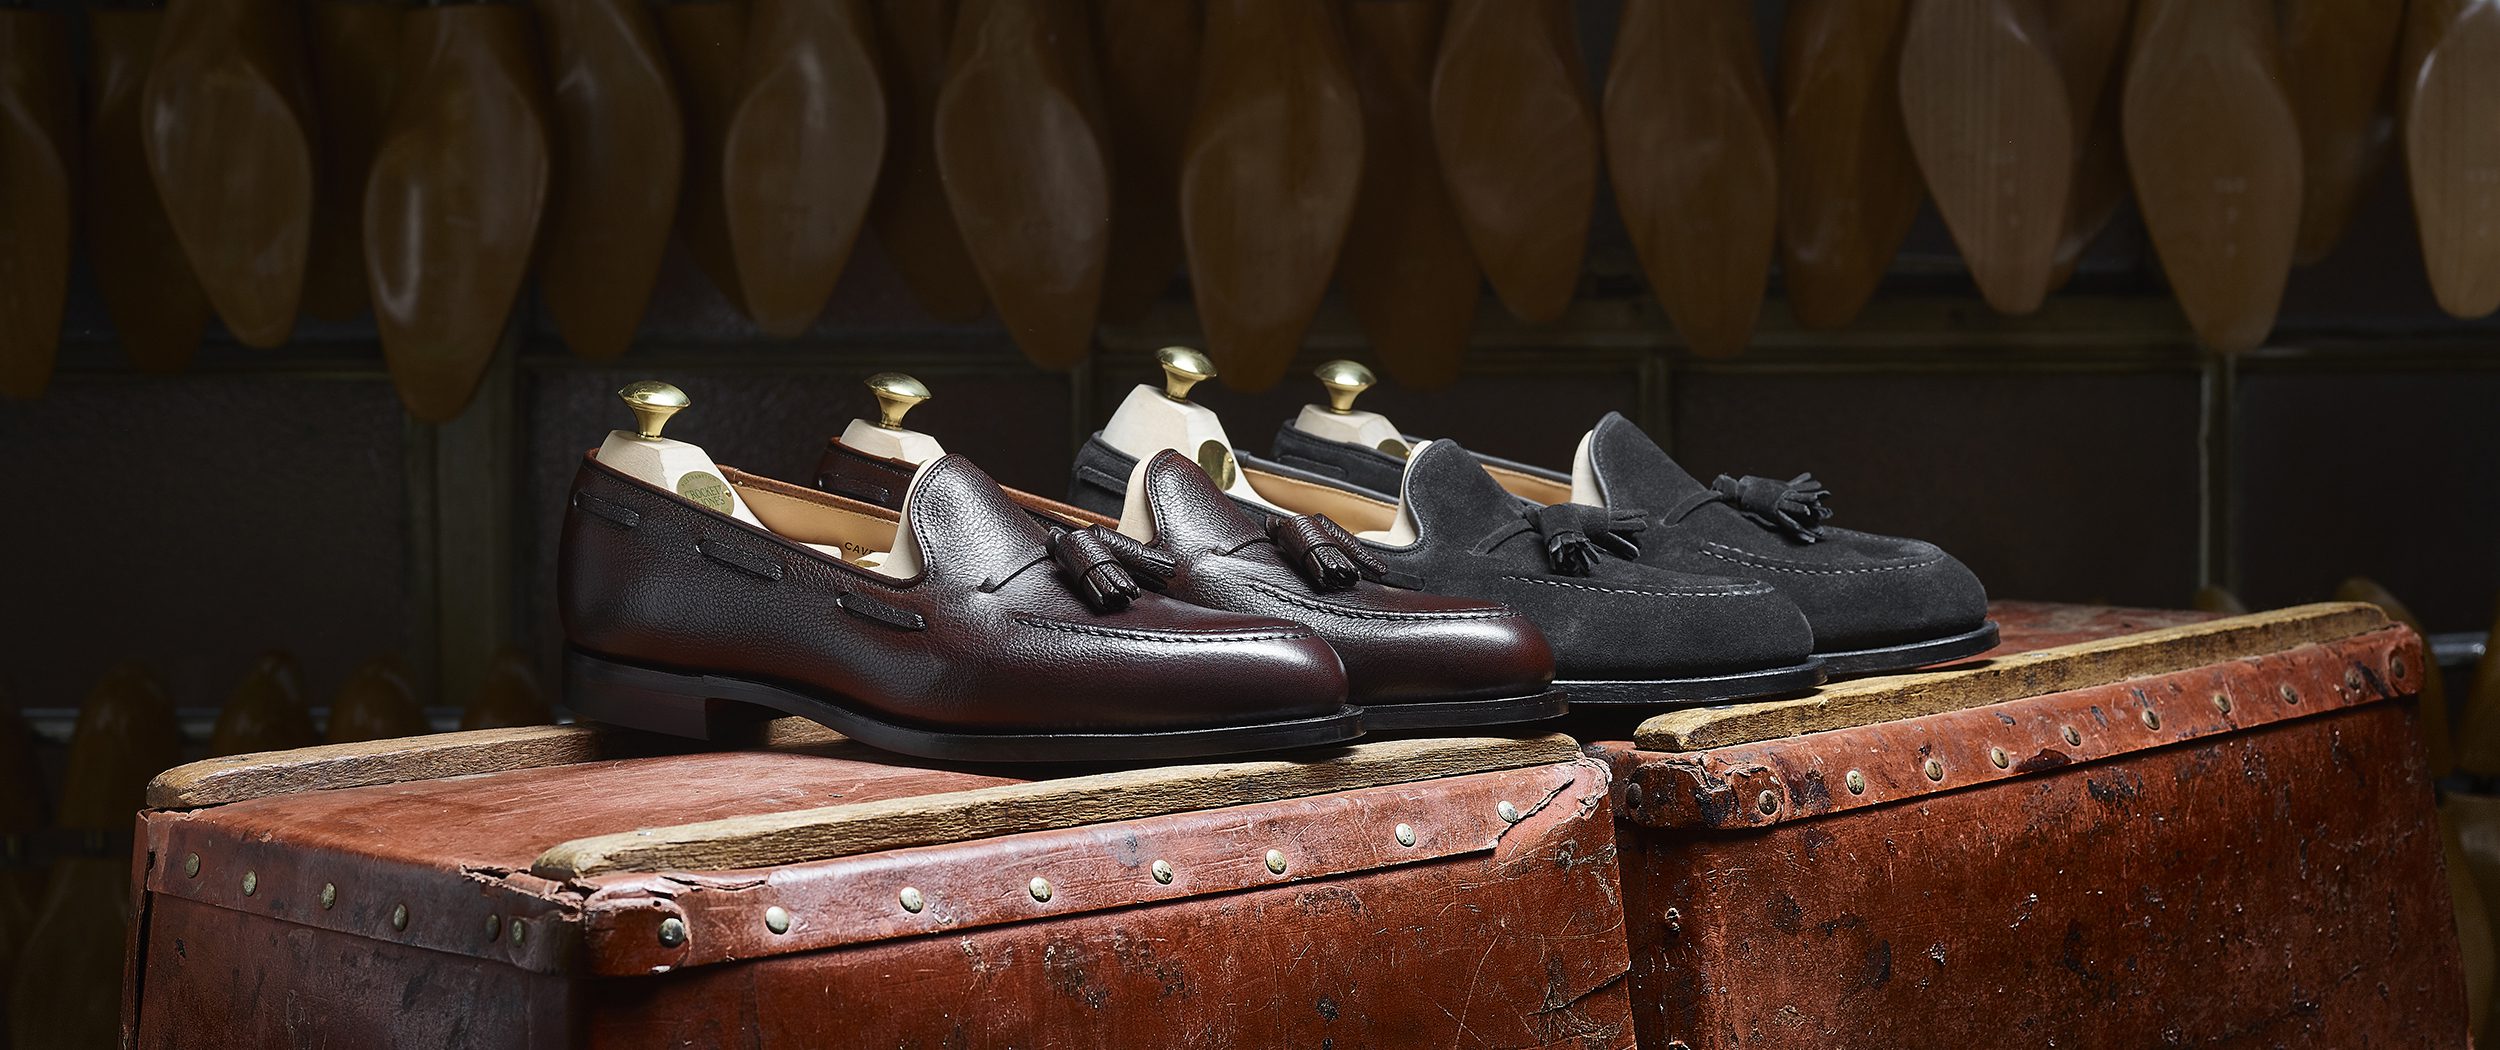 These are the best shoes from Crockett & Jones' new collection 